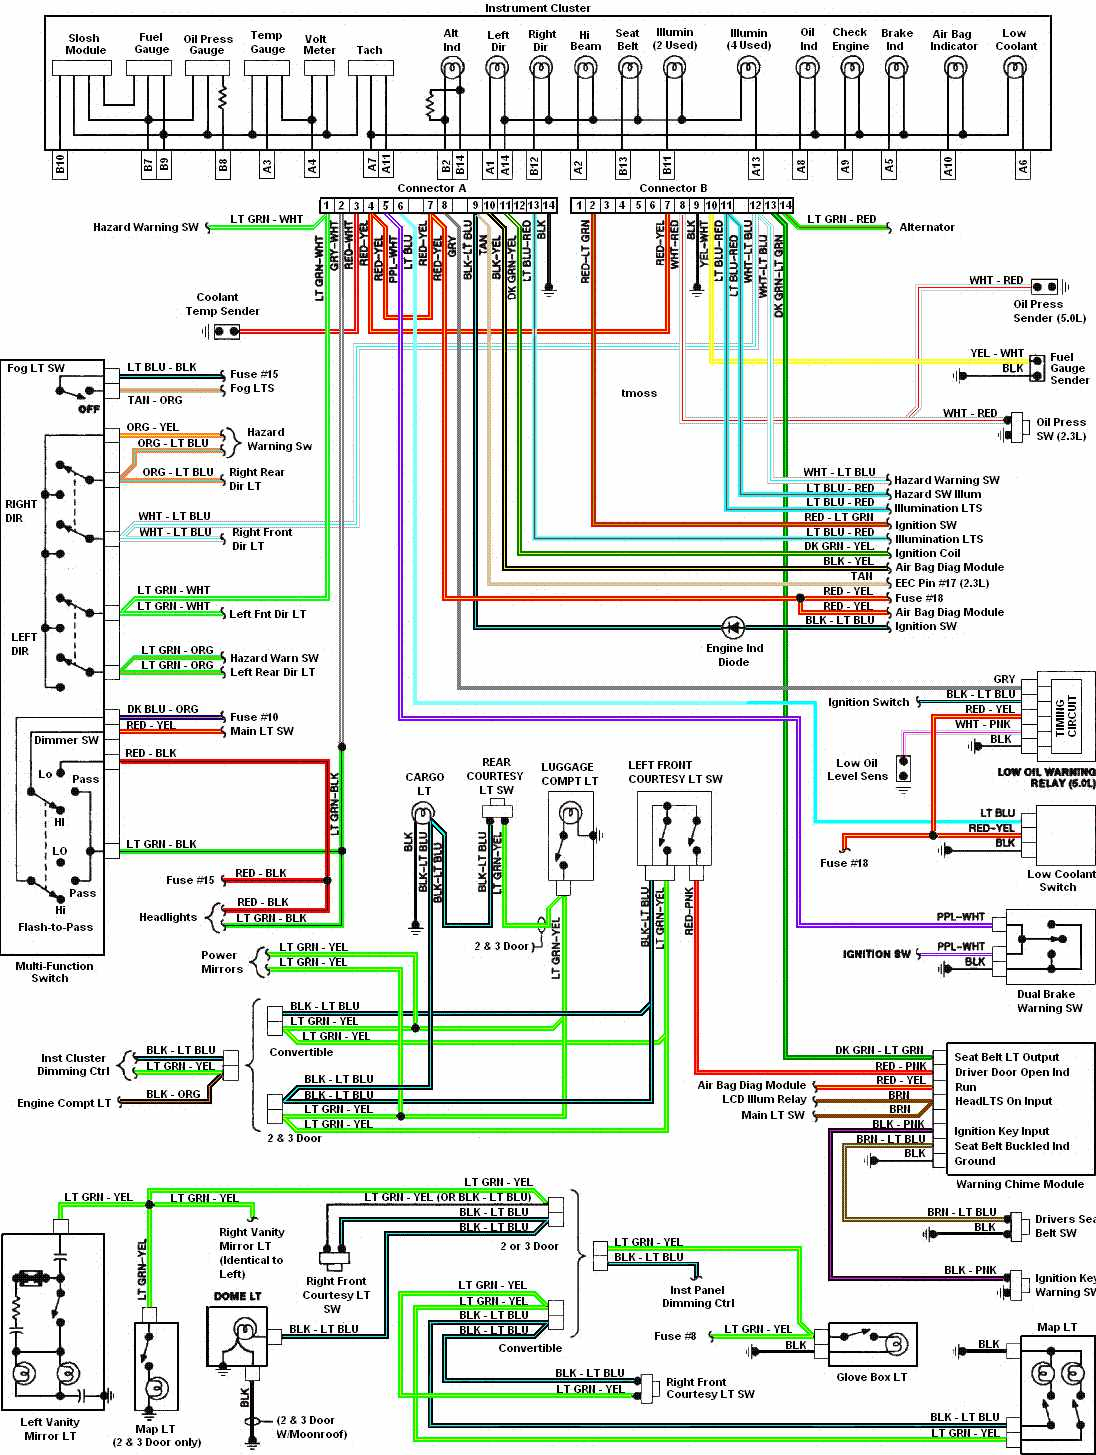 1993 Ford Stereo Wiring Diagram - All Wiring Diagram Data - Ford Ranger Radio Wiring Diagram